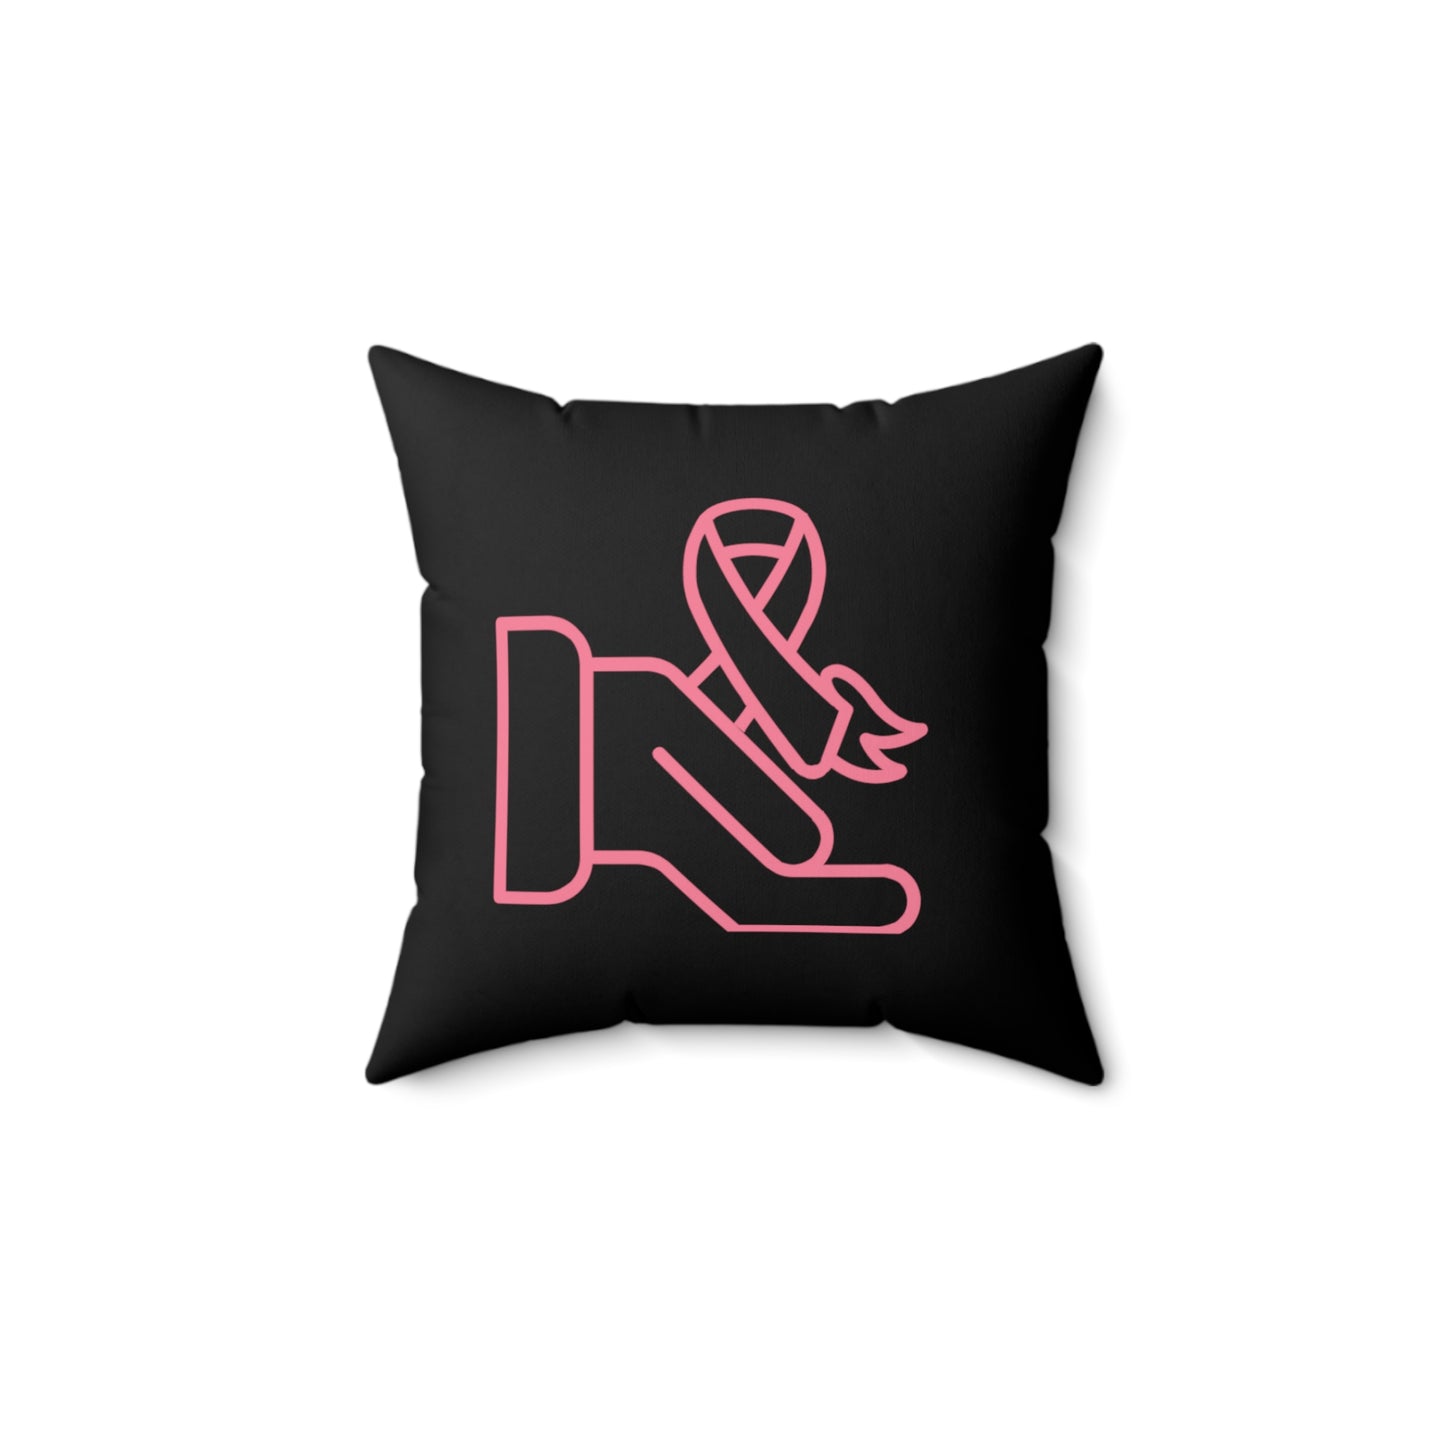 Spun Polyester Square Pillow: Fight Cancer Black